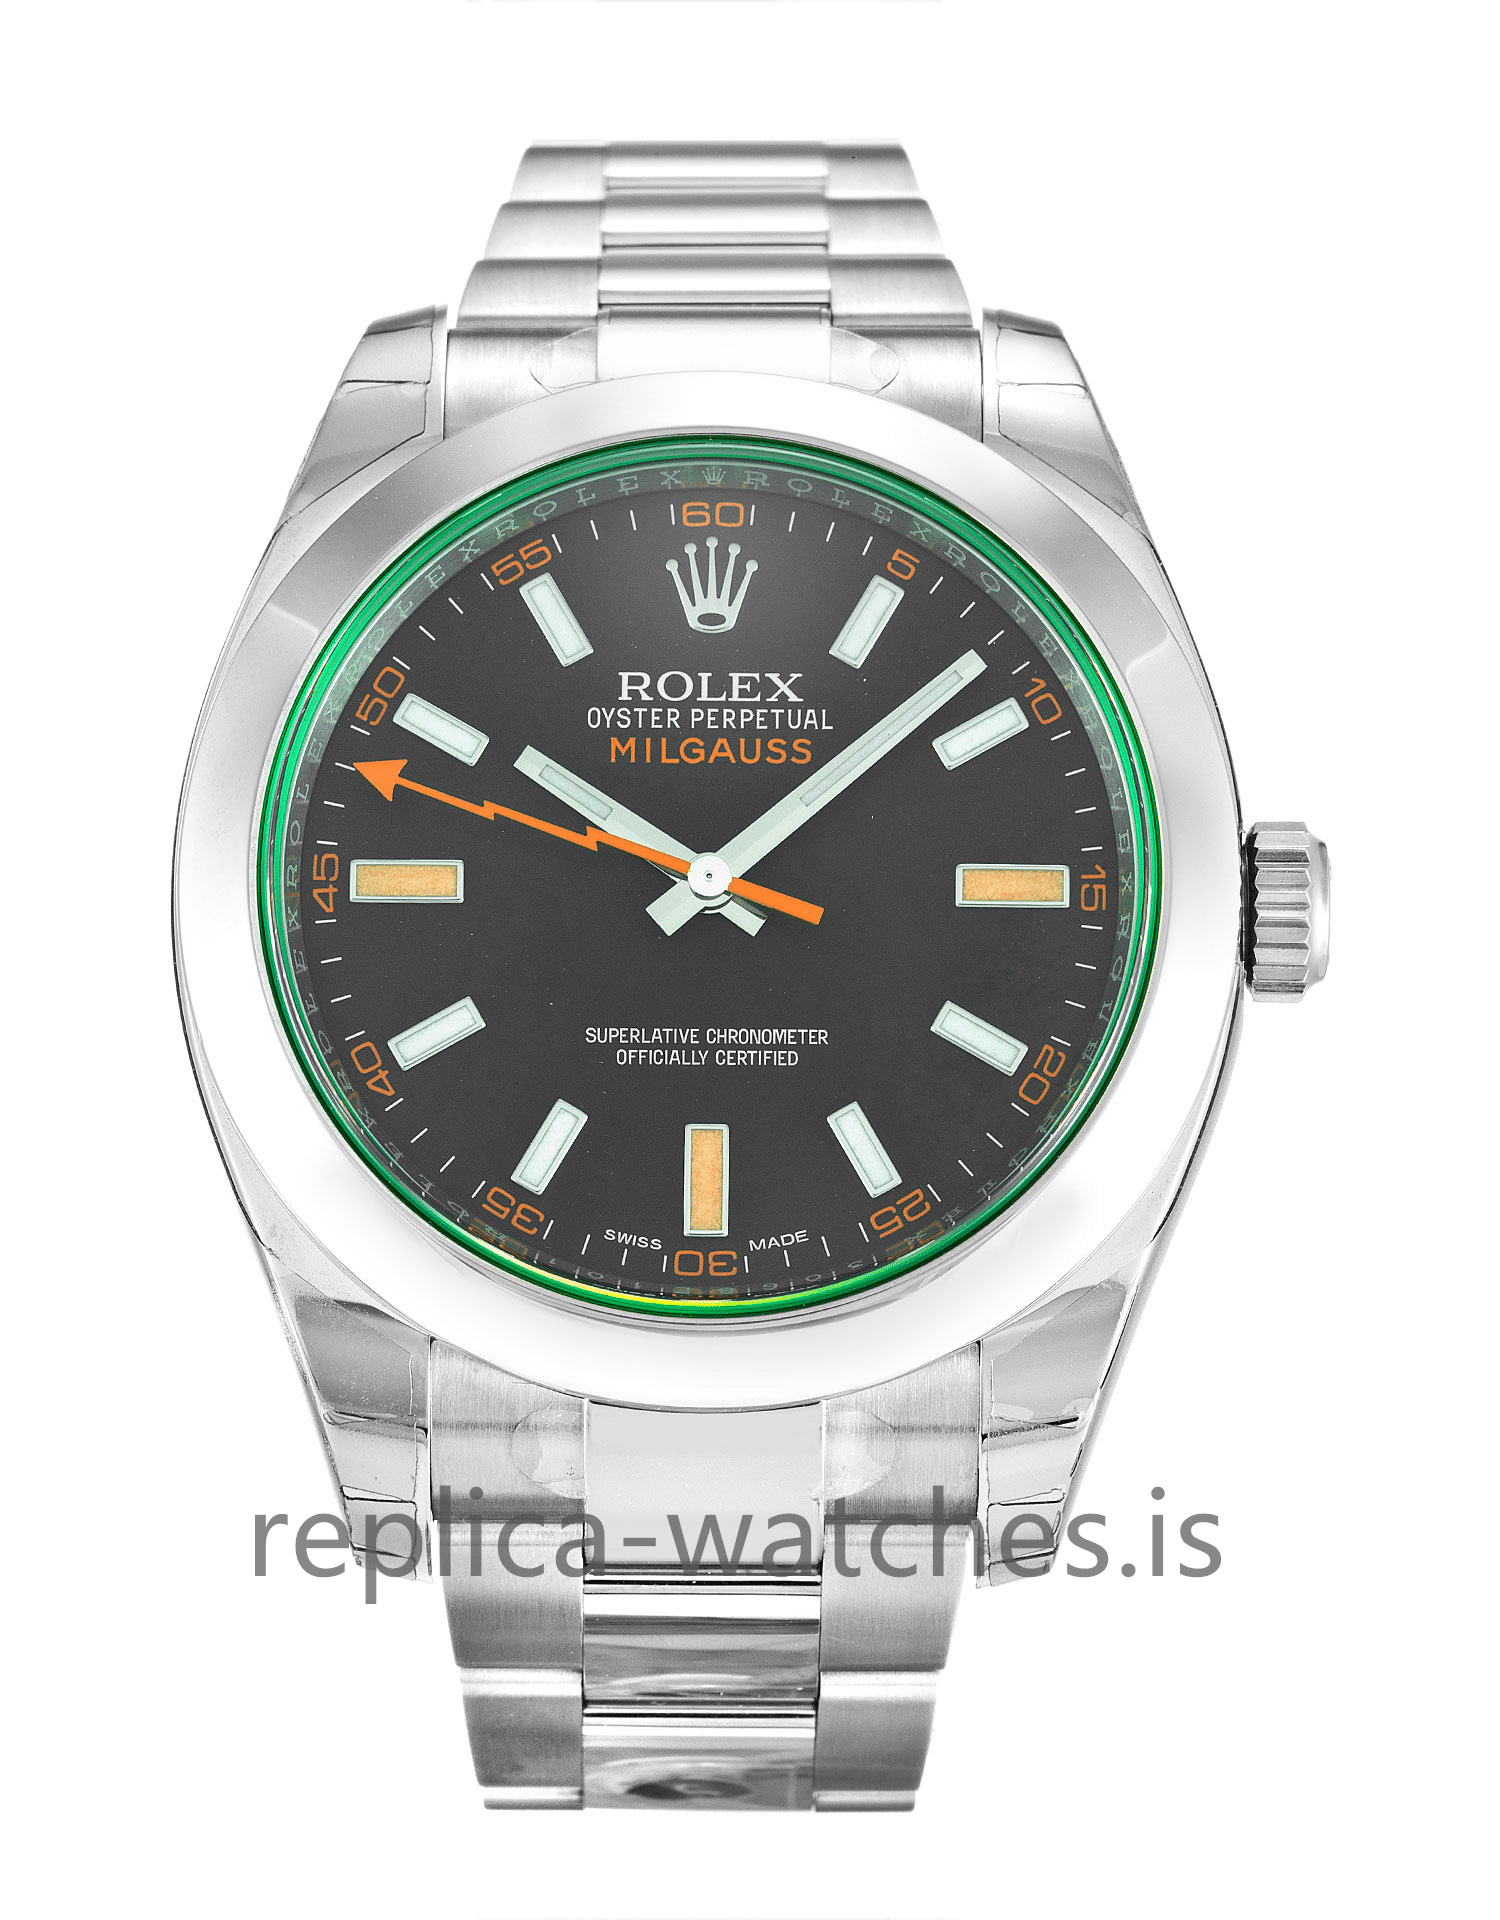 https://www.replica-watches.is safe site to buy replica rolex watches